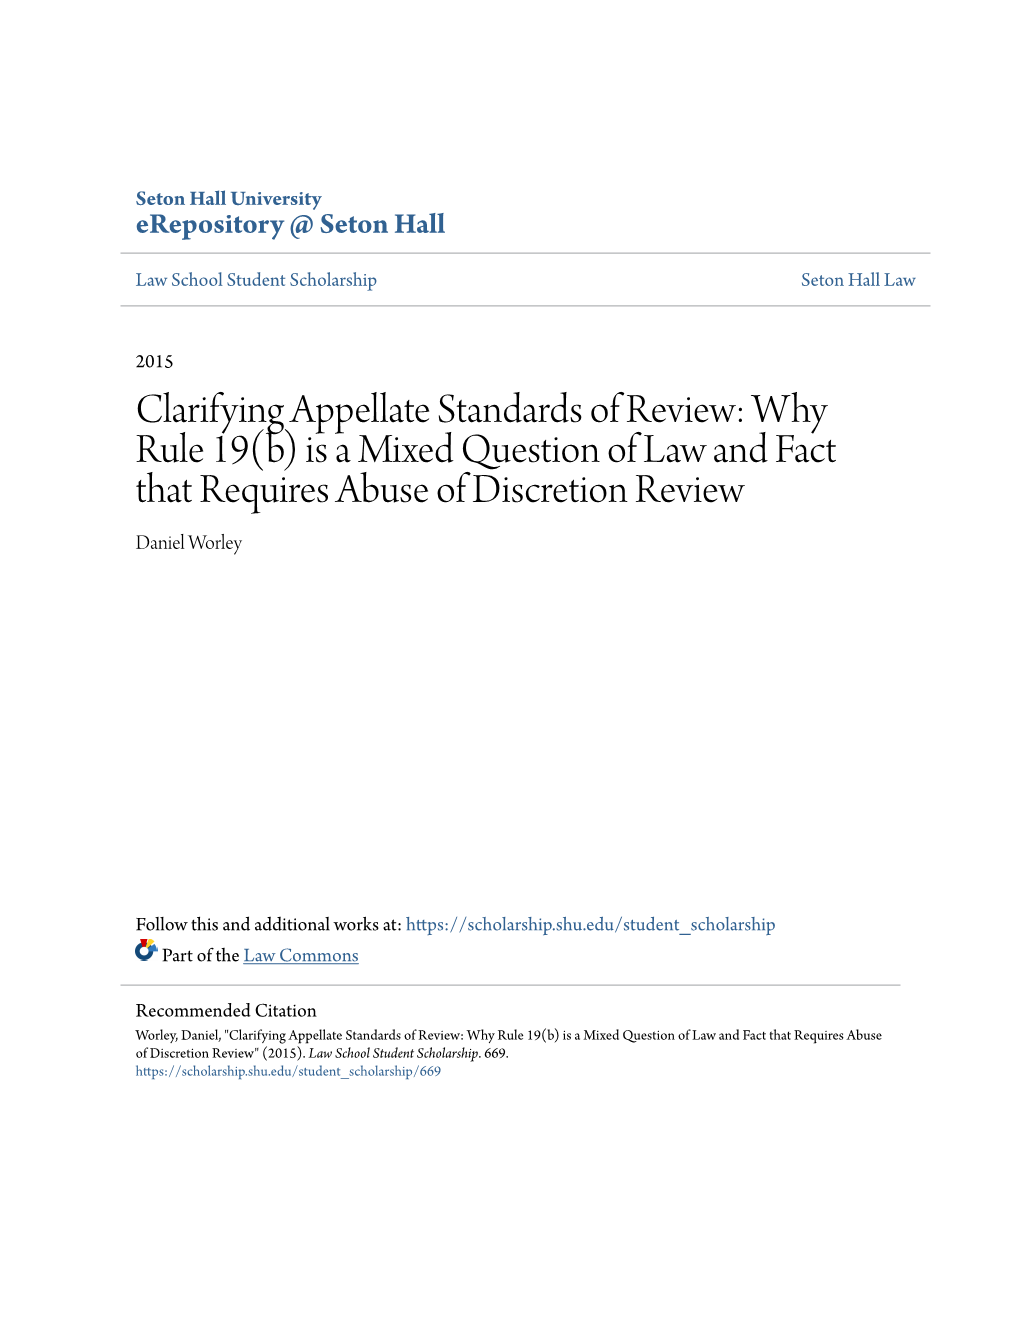 Clarifying Appellate Standards of Review: Why Rule 19(B) Is a Mixed Question of Law and Fact That Requires Abuse of Discretion Review Daniel Worley